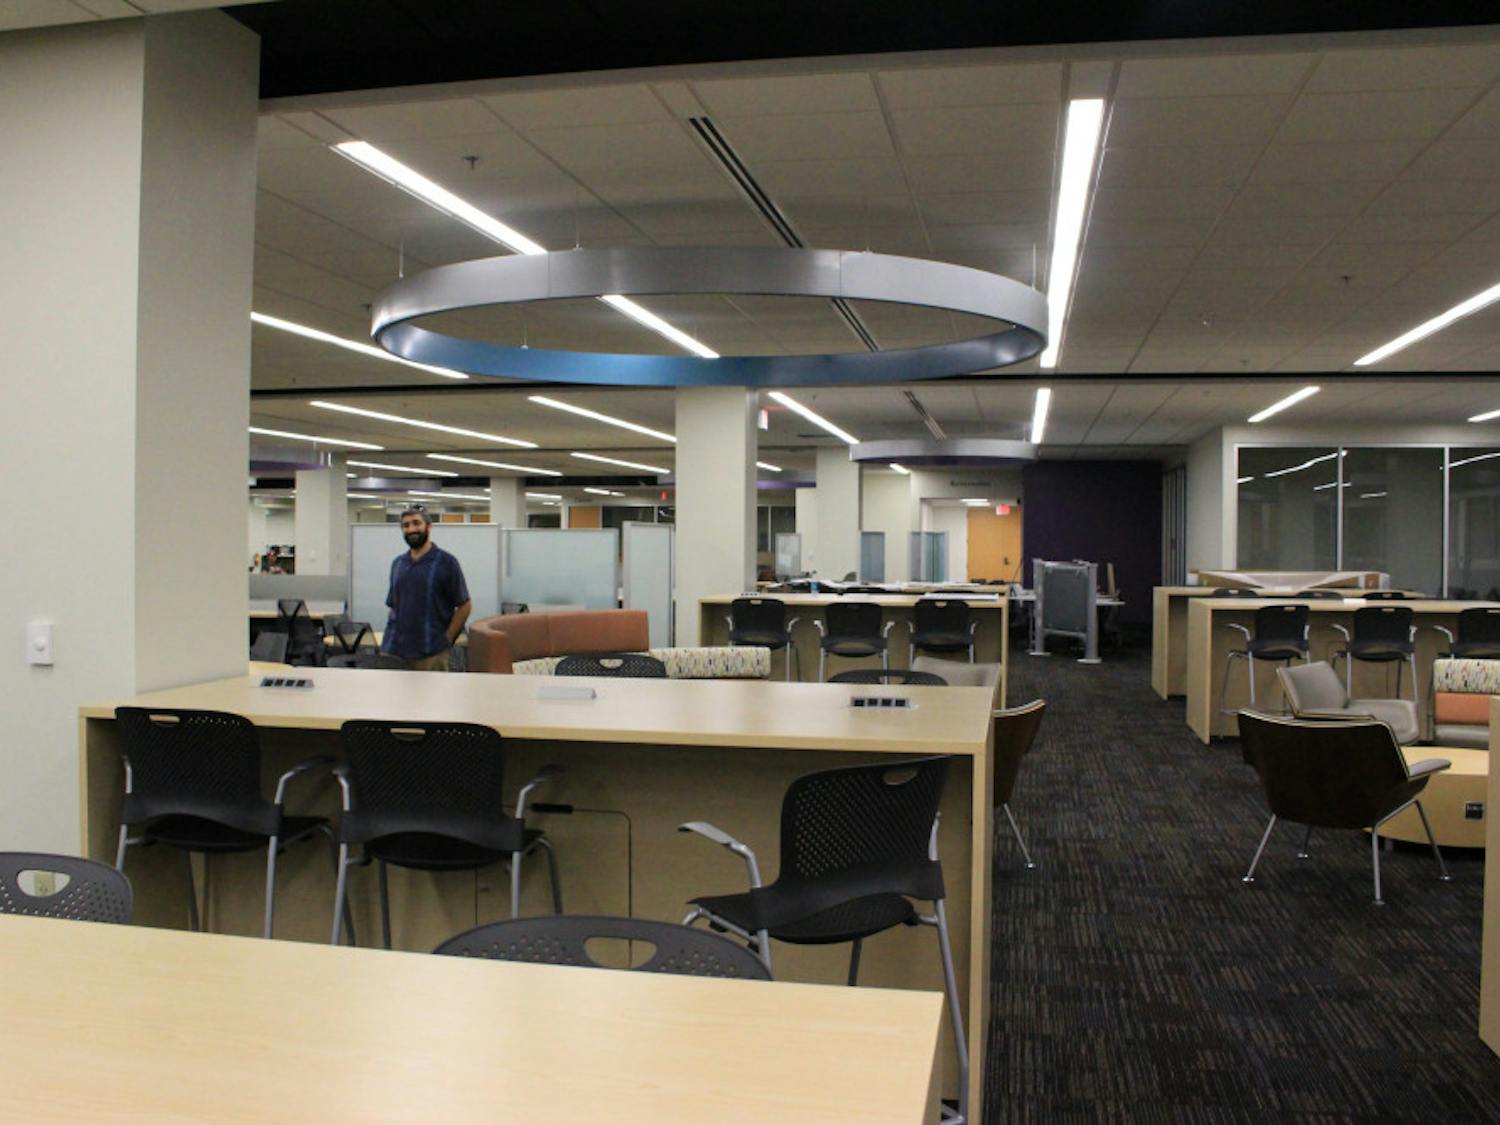 Marston Library's basement's renovations are almost finished. The area will reopen wednesday. 